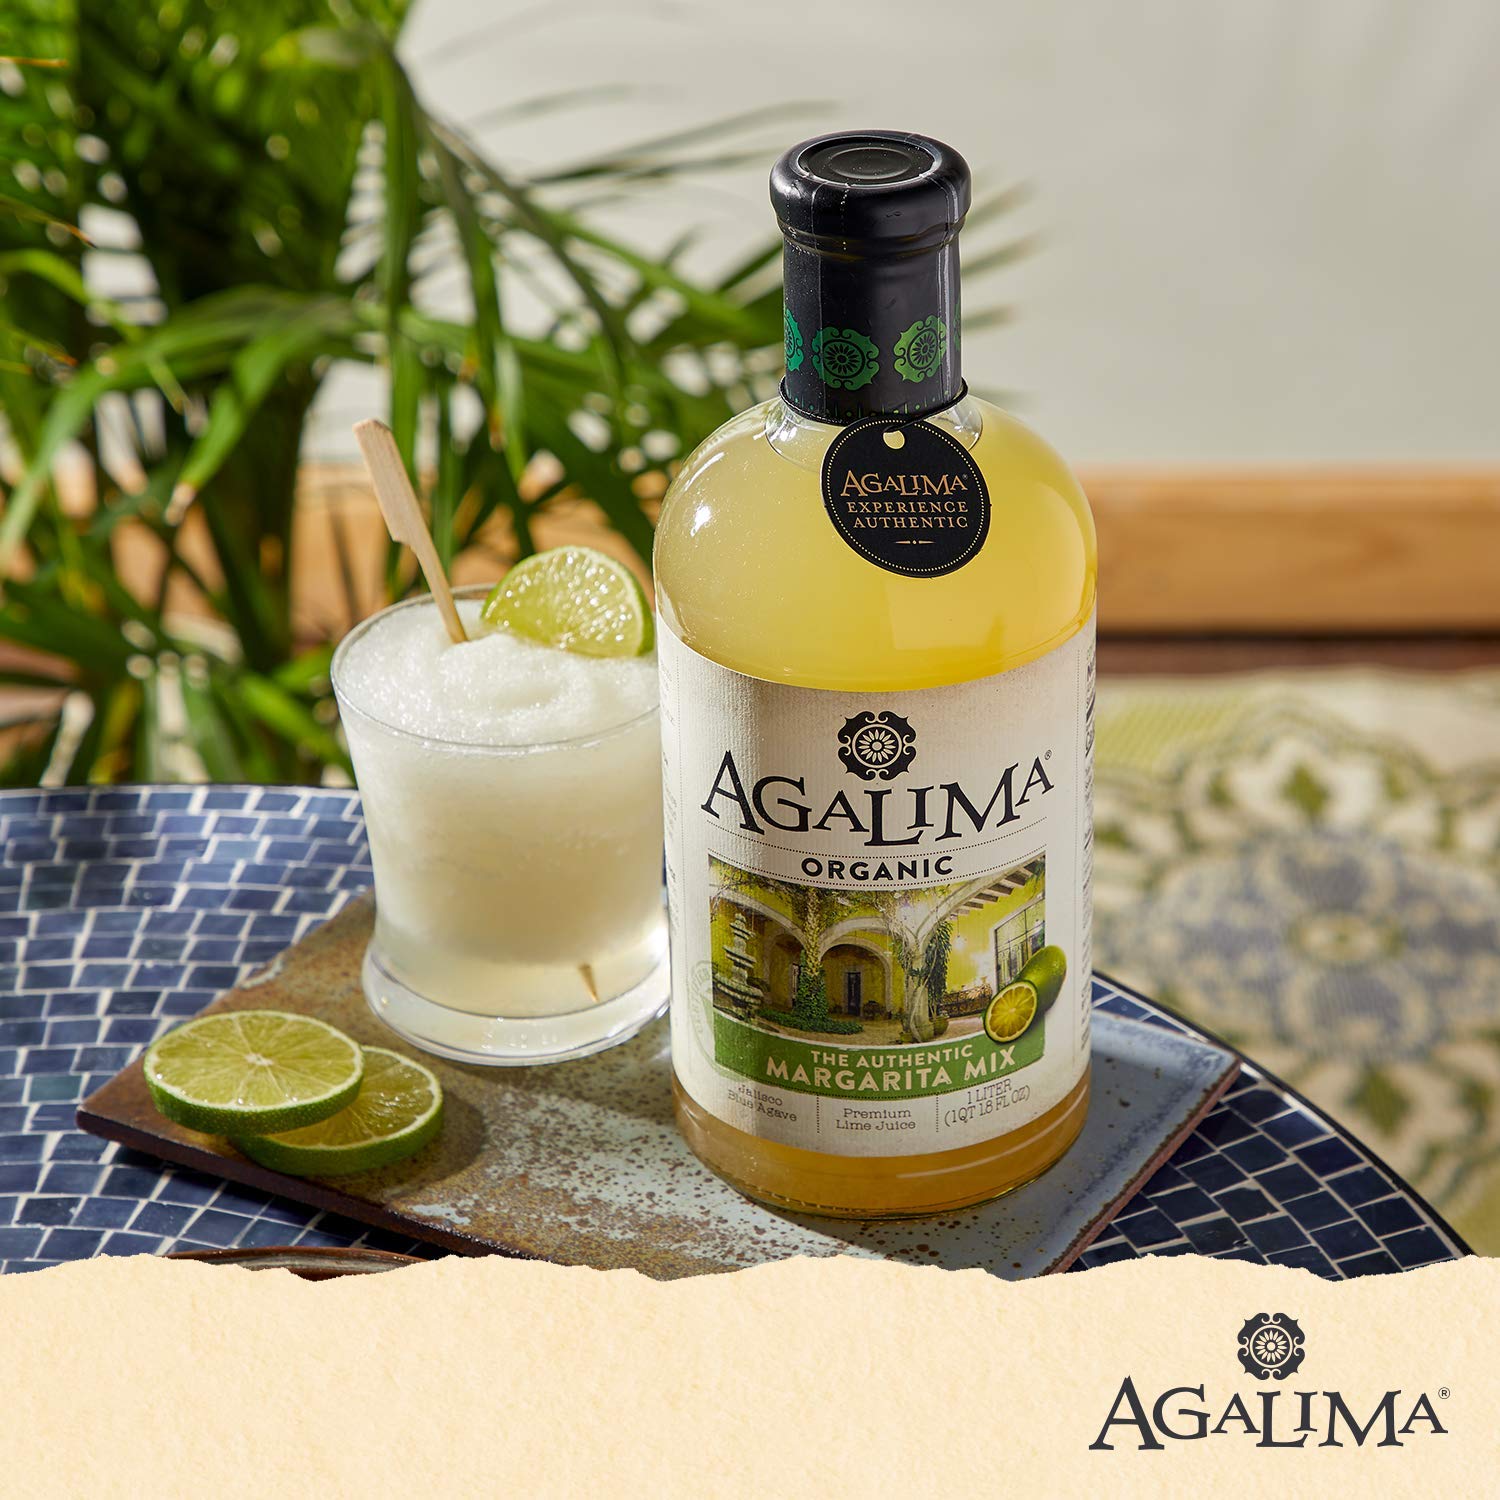 Agalima Organic Authenic Margarita Drink Mix, All Natural, 1 Liter (18 Fl Oz) Glass Bottle, Individually Boxed - image 4 of 6